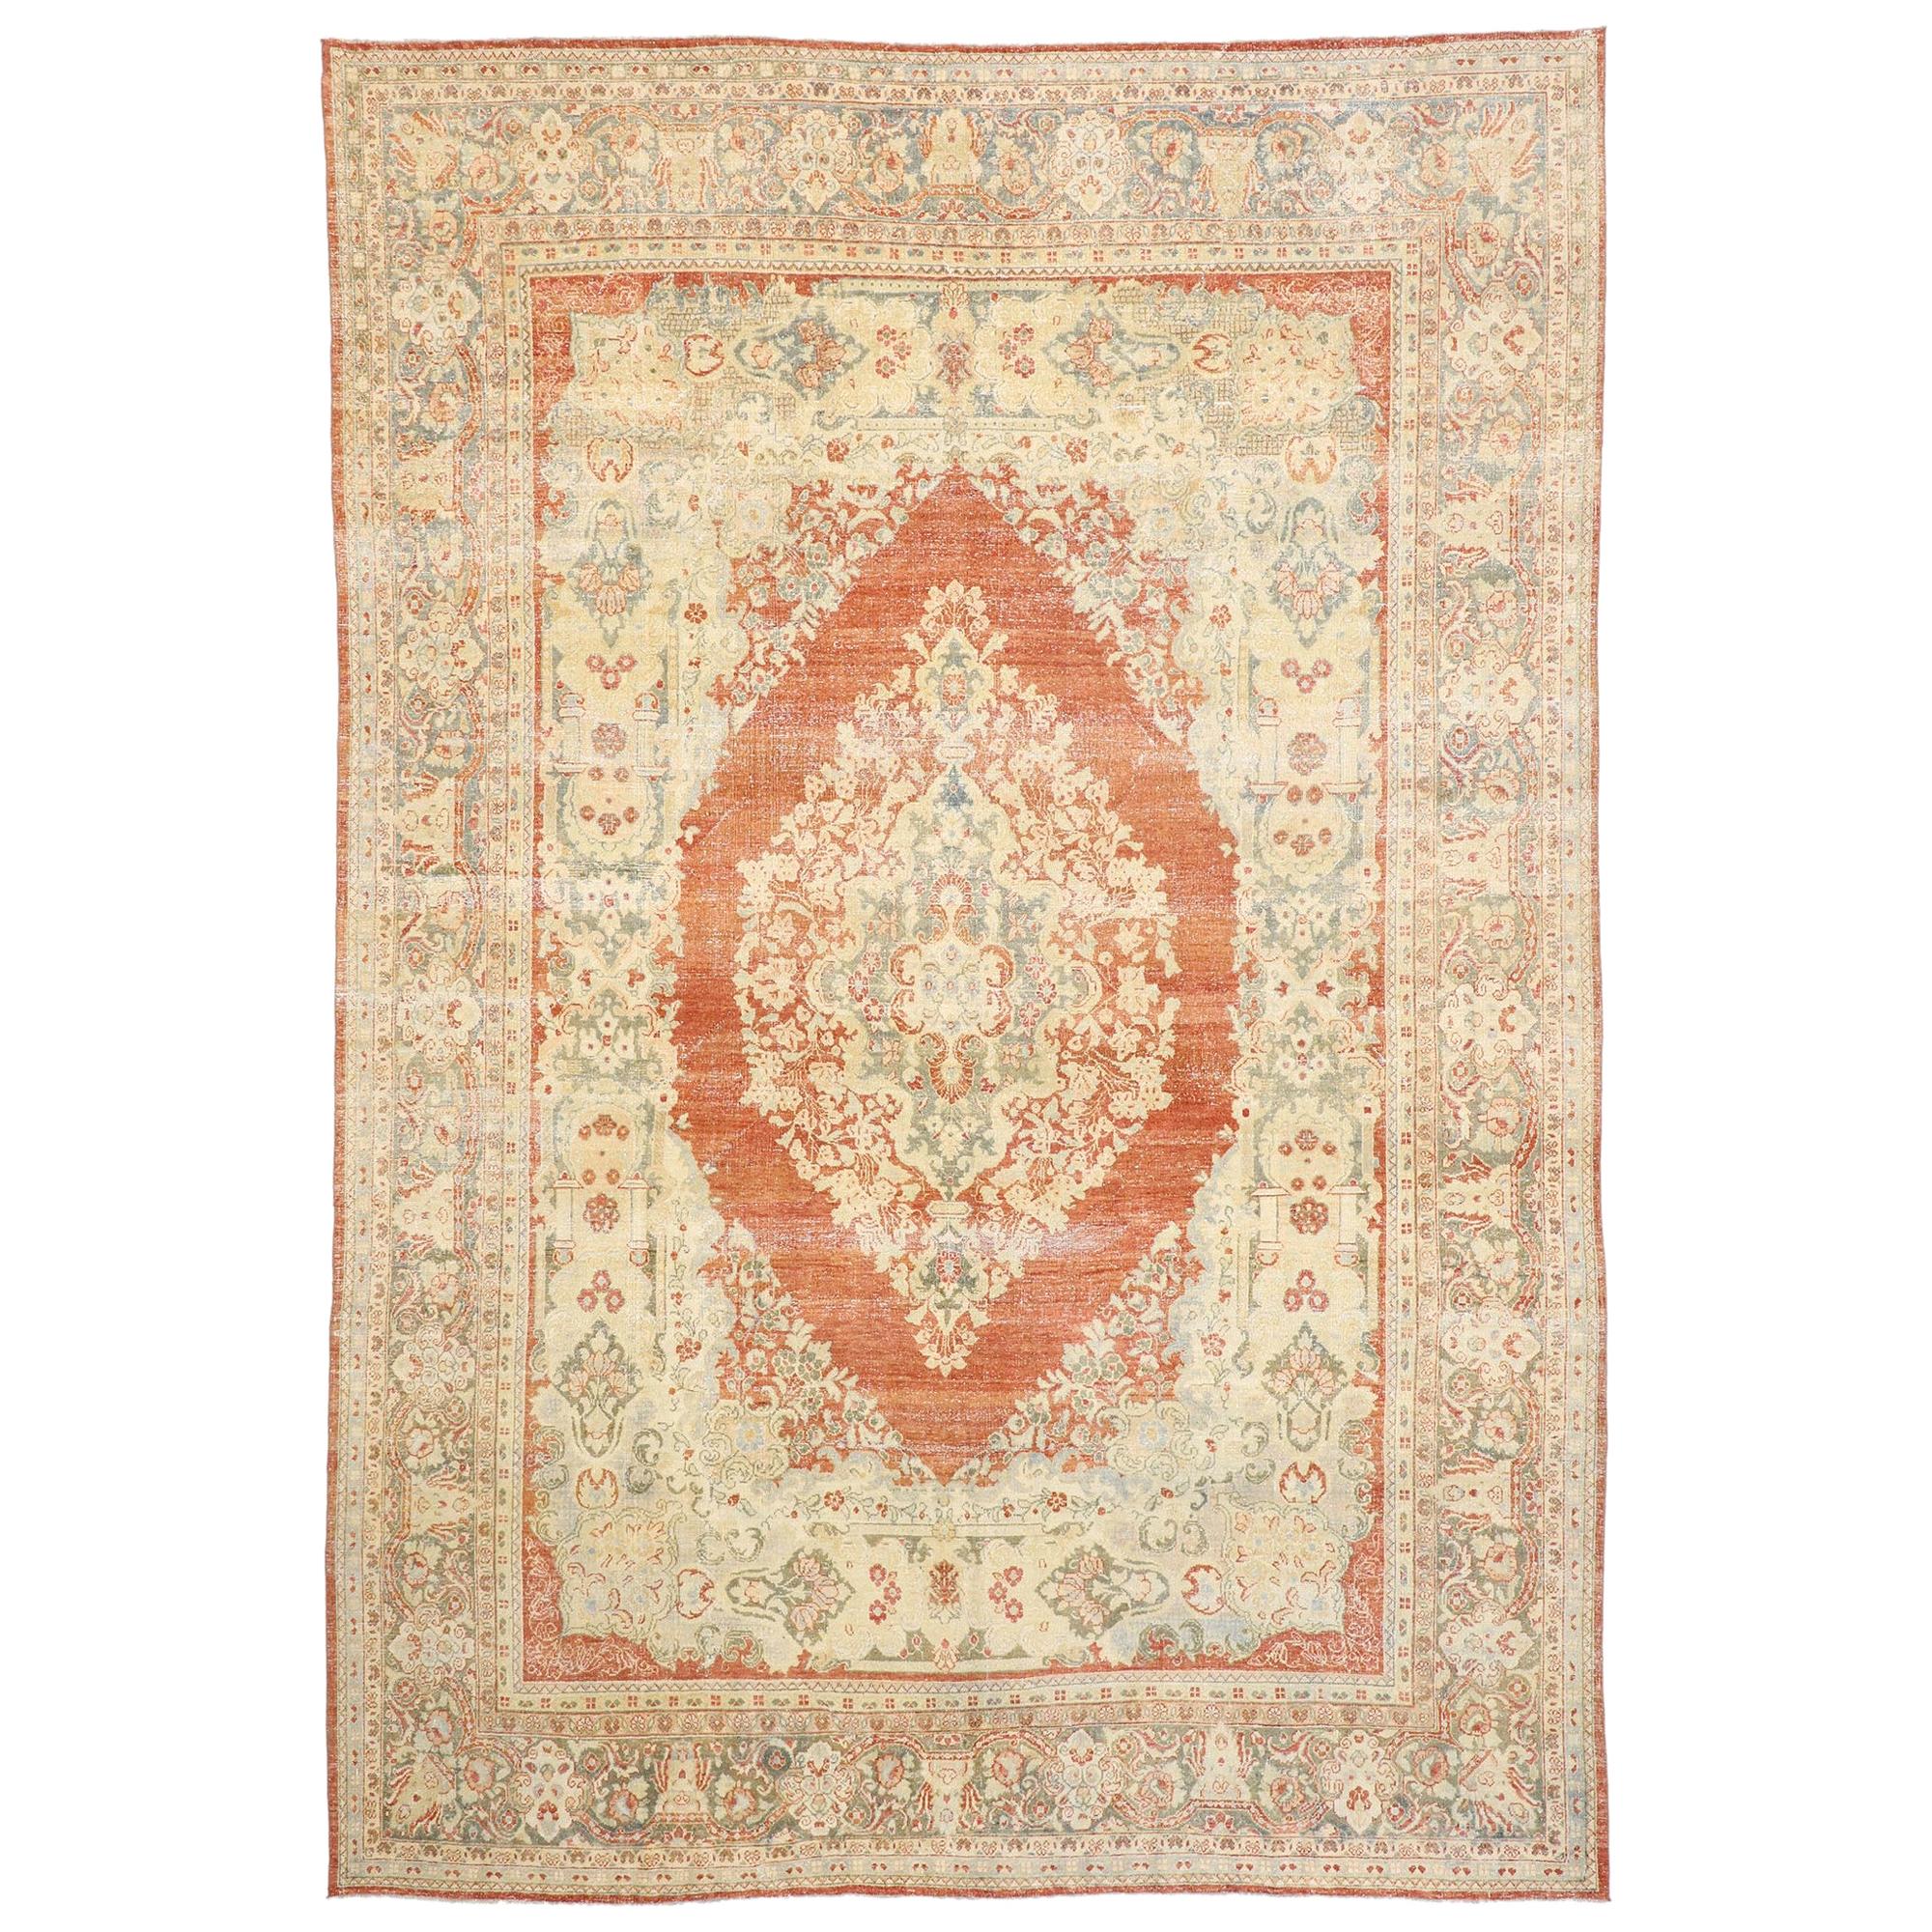 Vintage Persian Mahal Rug with Rustic English Style, 10'00 x 14'06 